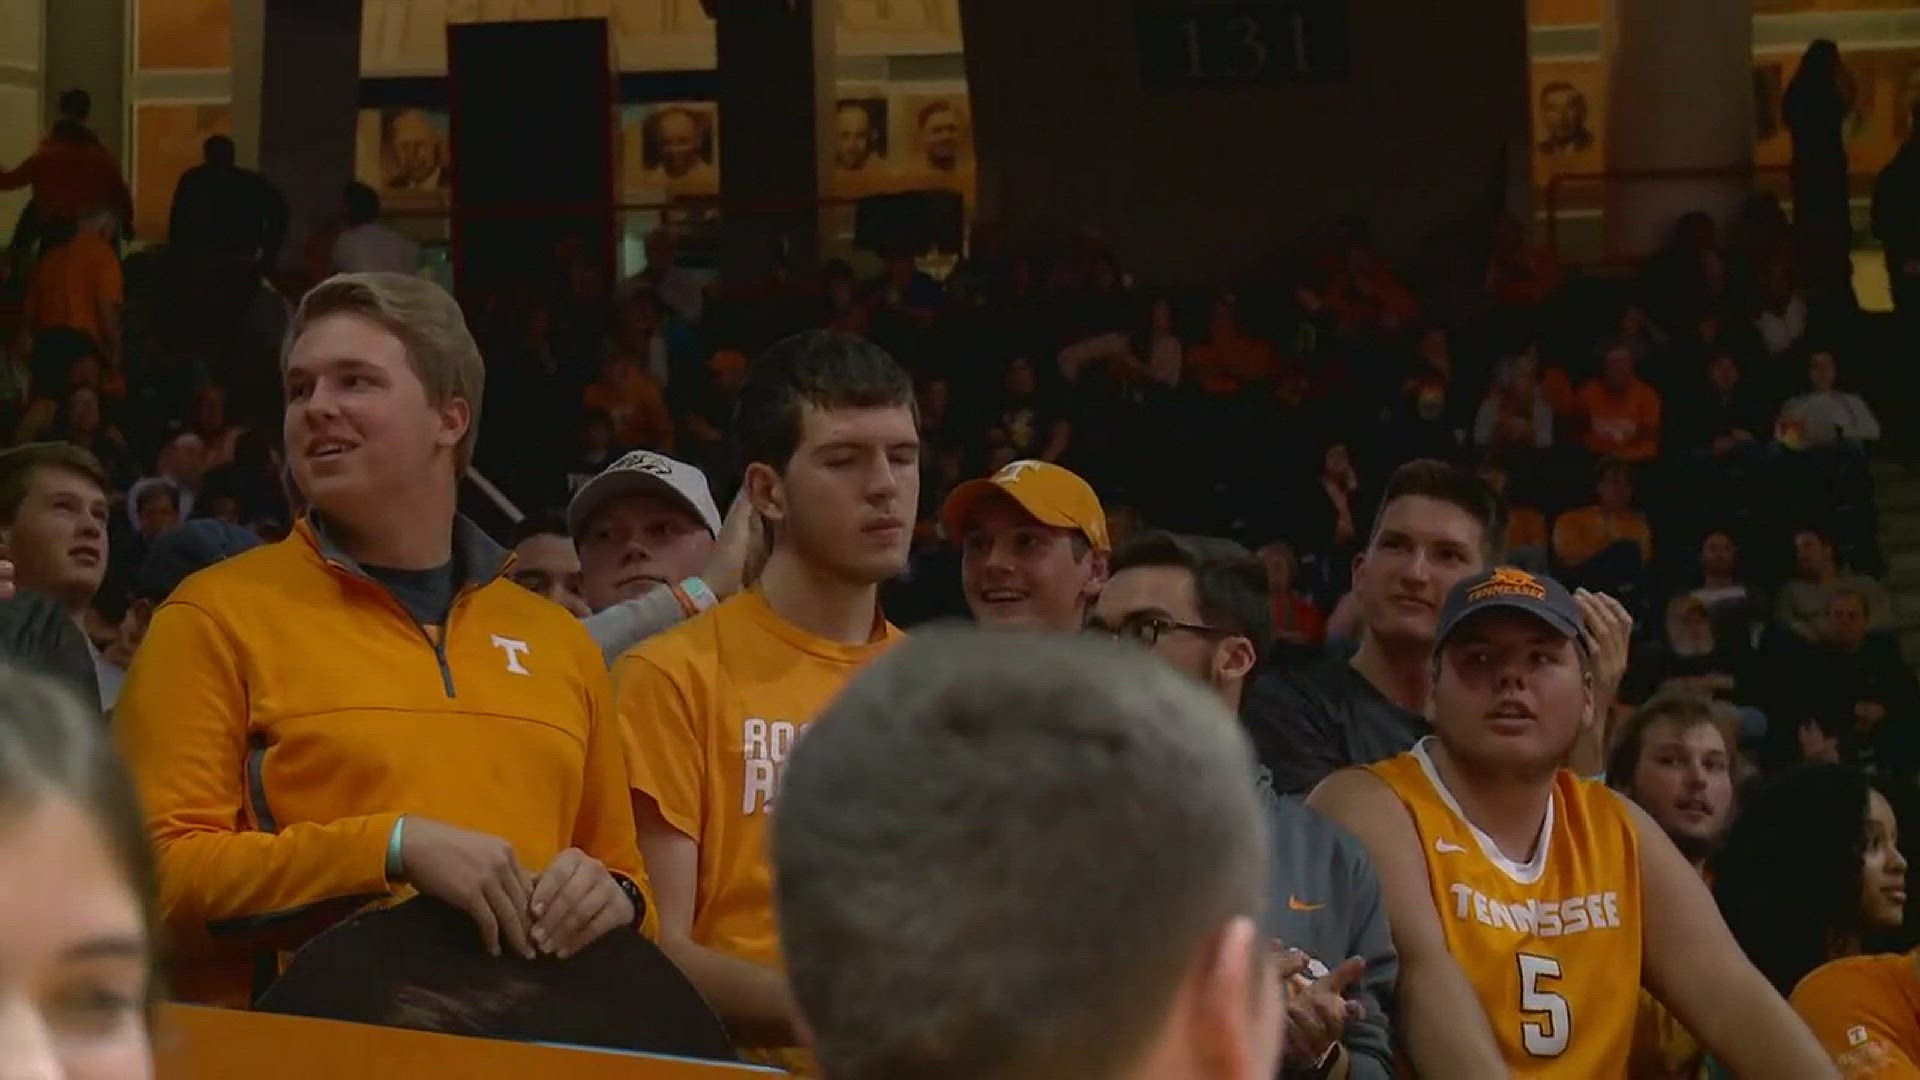 Some UT fans start chants aimed at the Tennessee Director of Athletics.